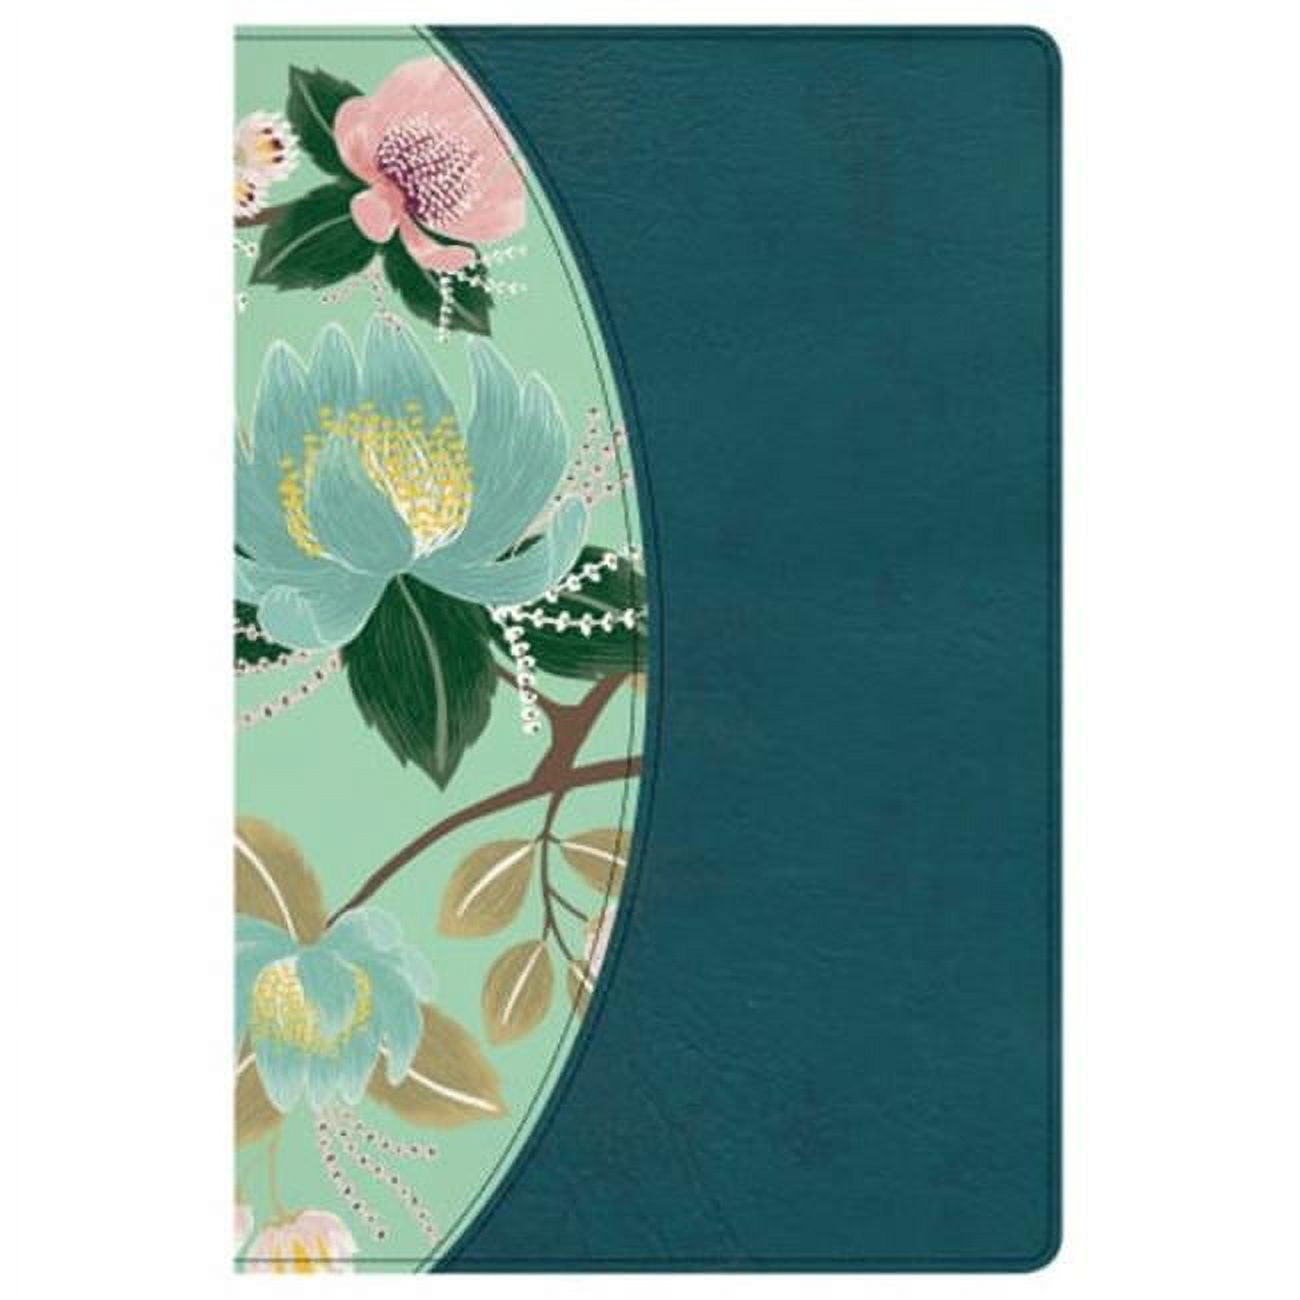 Csb Study Bible For Women Leather Touch Indexed Cover, Teal